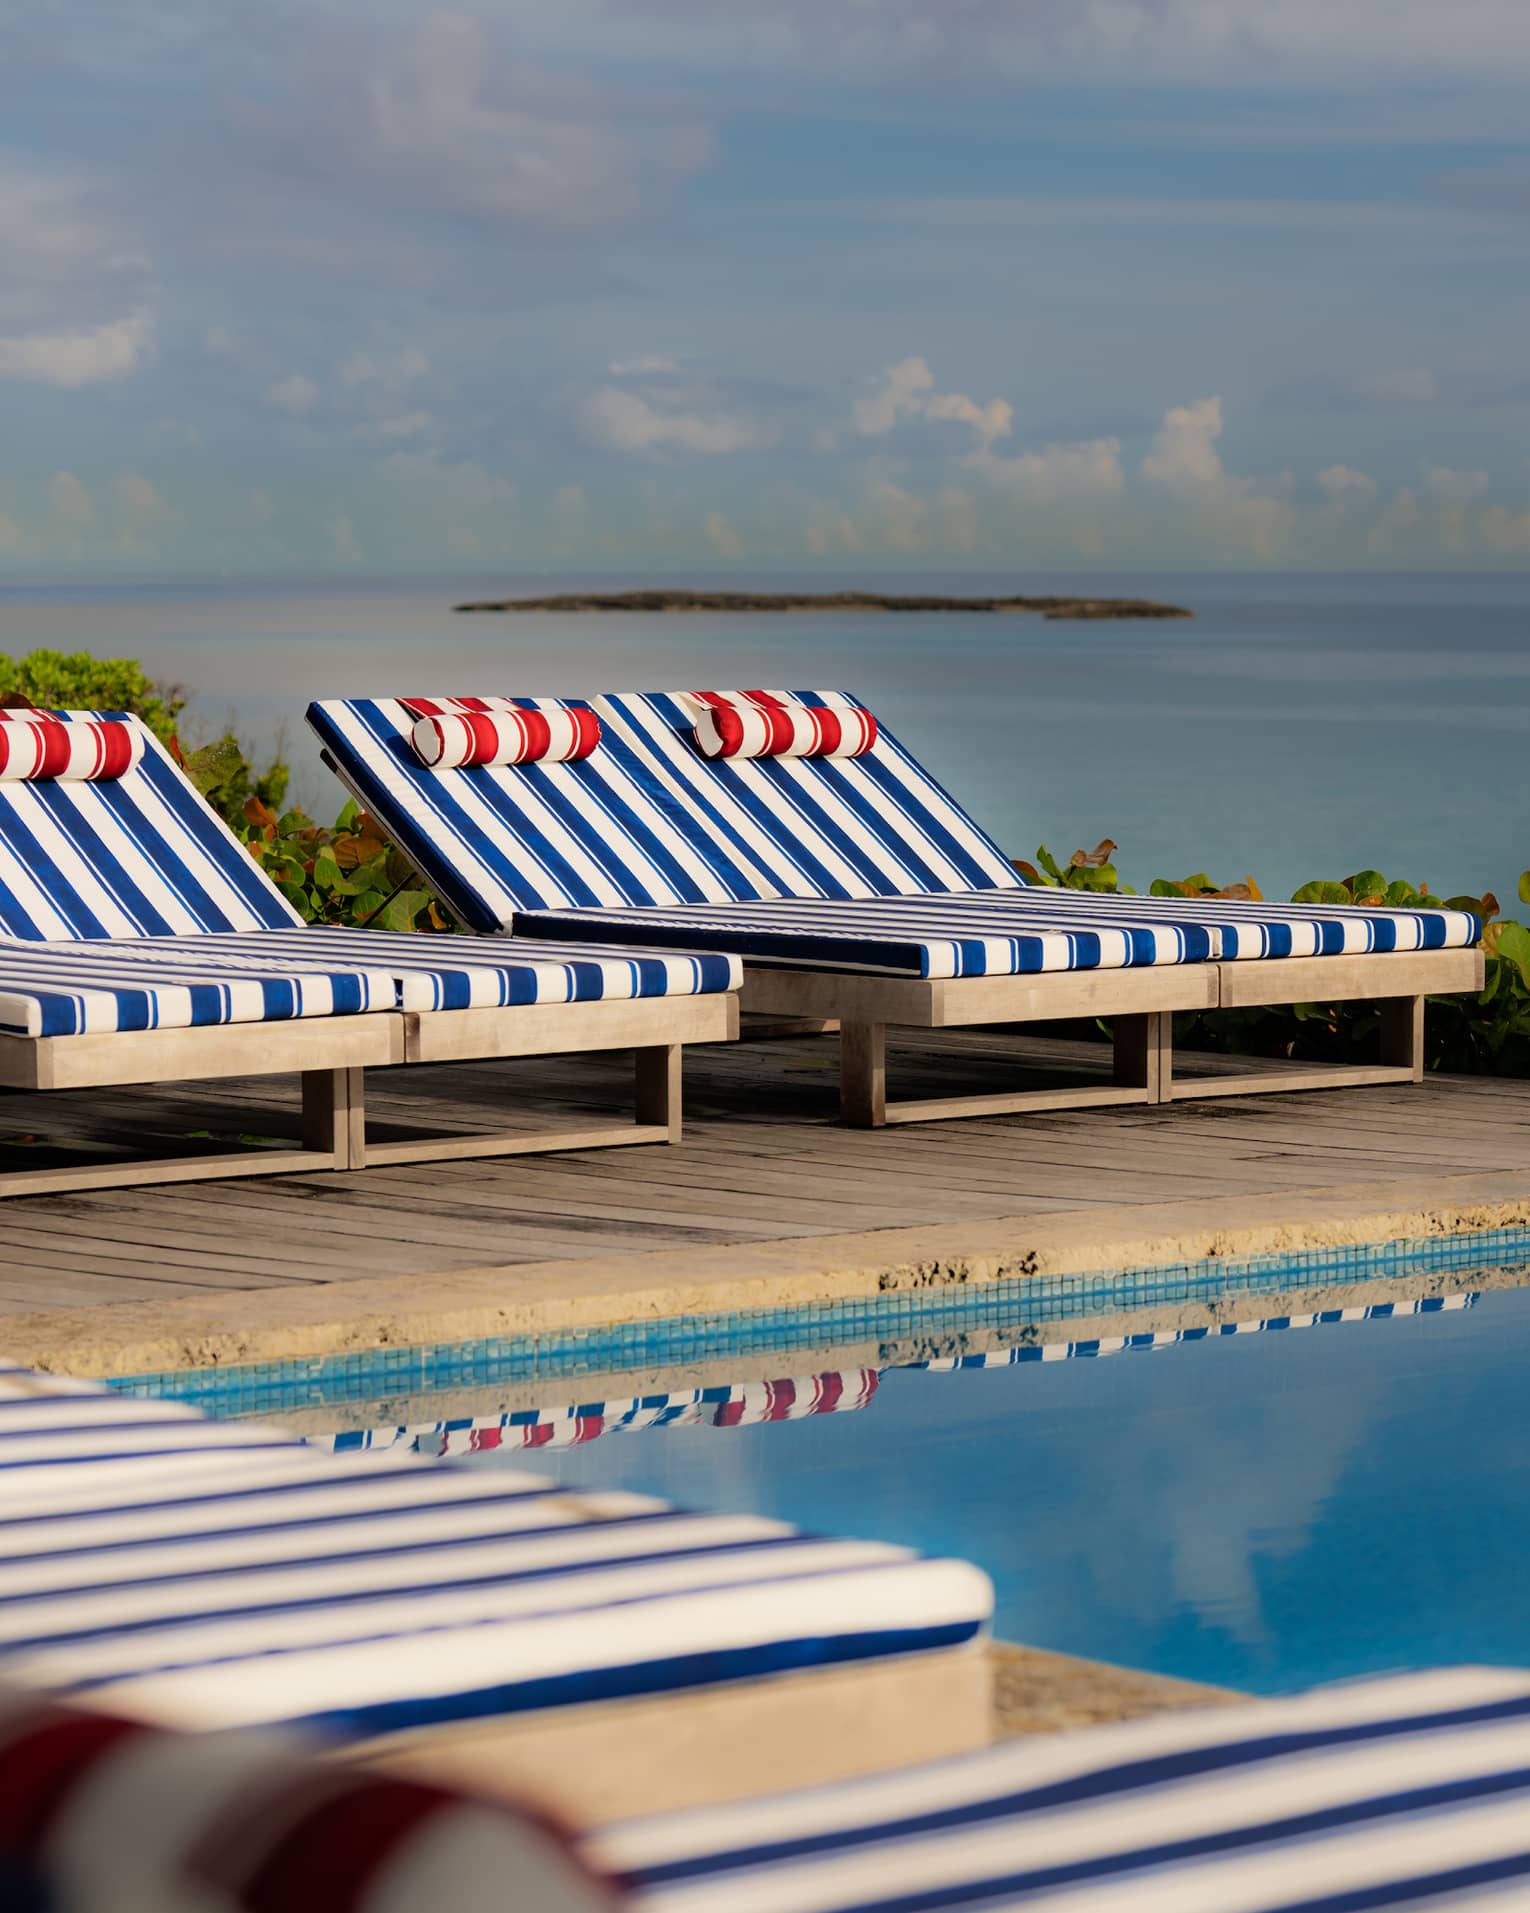 A neat row lounge chairs with blue-and-white striped upholstery and red-and-white striped pillows sit on an elevated pool deck with the ocean in the background